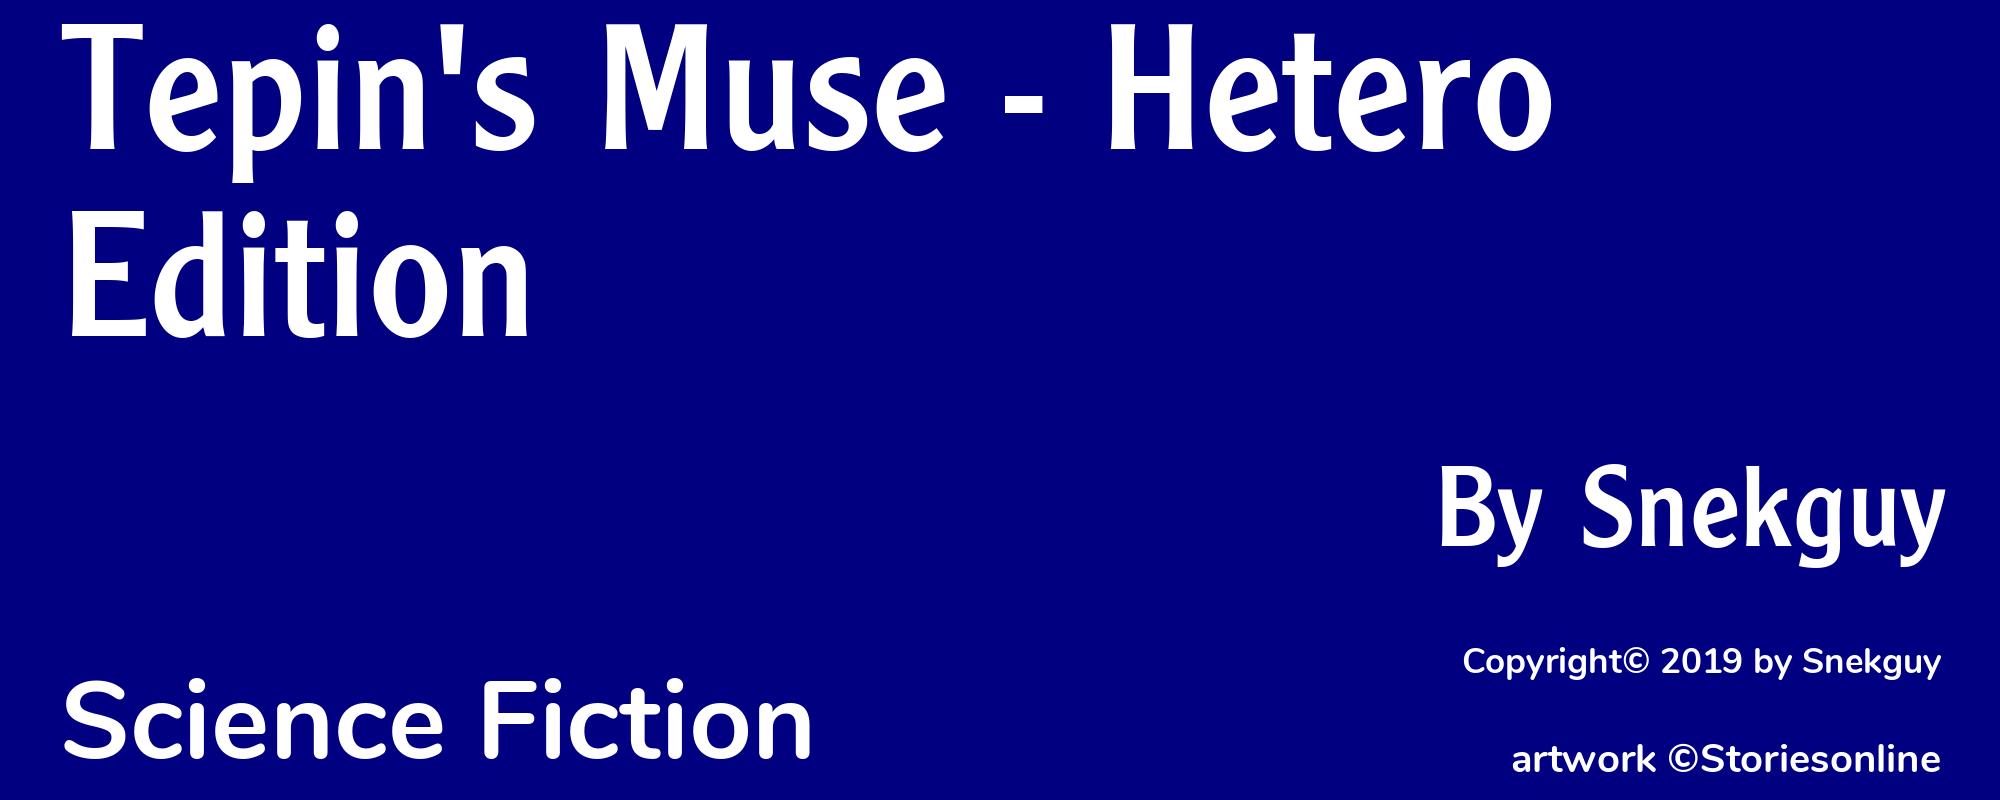 Tepin's Muse - Hetero Edition - Cover